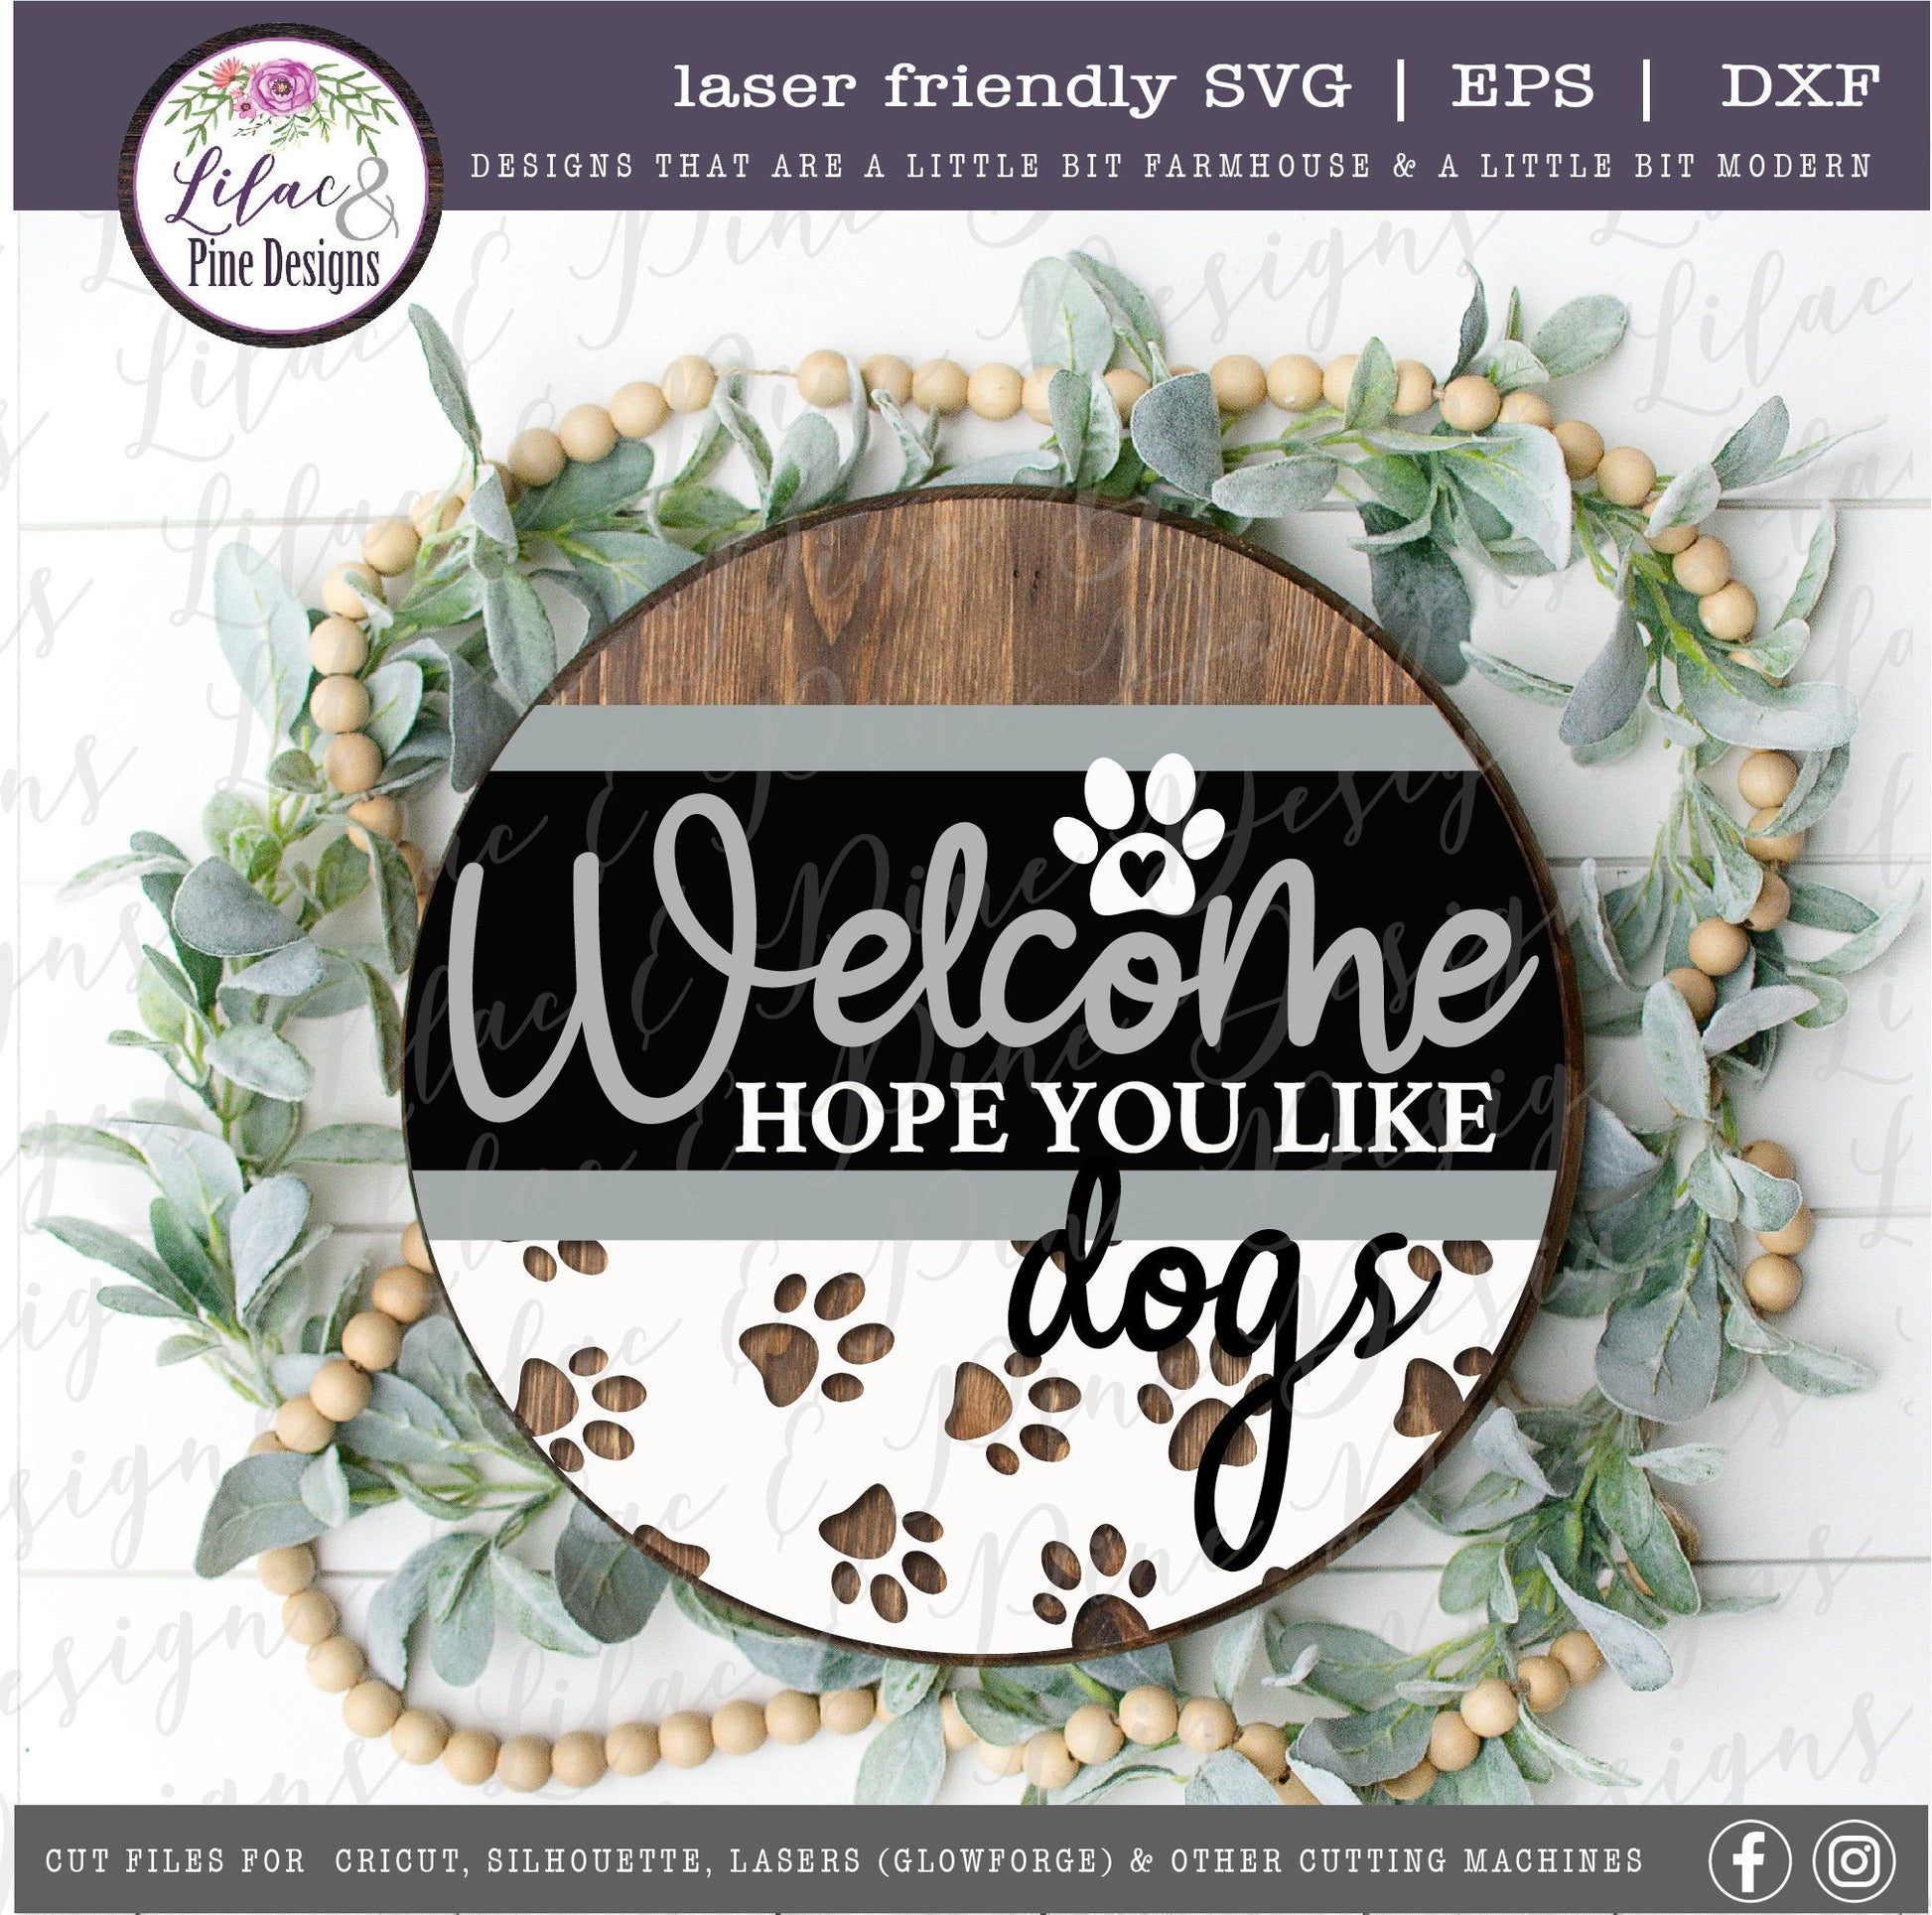 Welcome hope you like dogs sign, Dog lover SVG, Welcome SVG, front door decor, round wood sign, paw print, Glowforge Svg, laser cut file